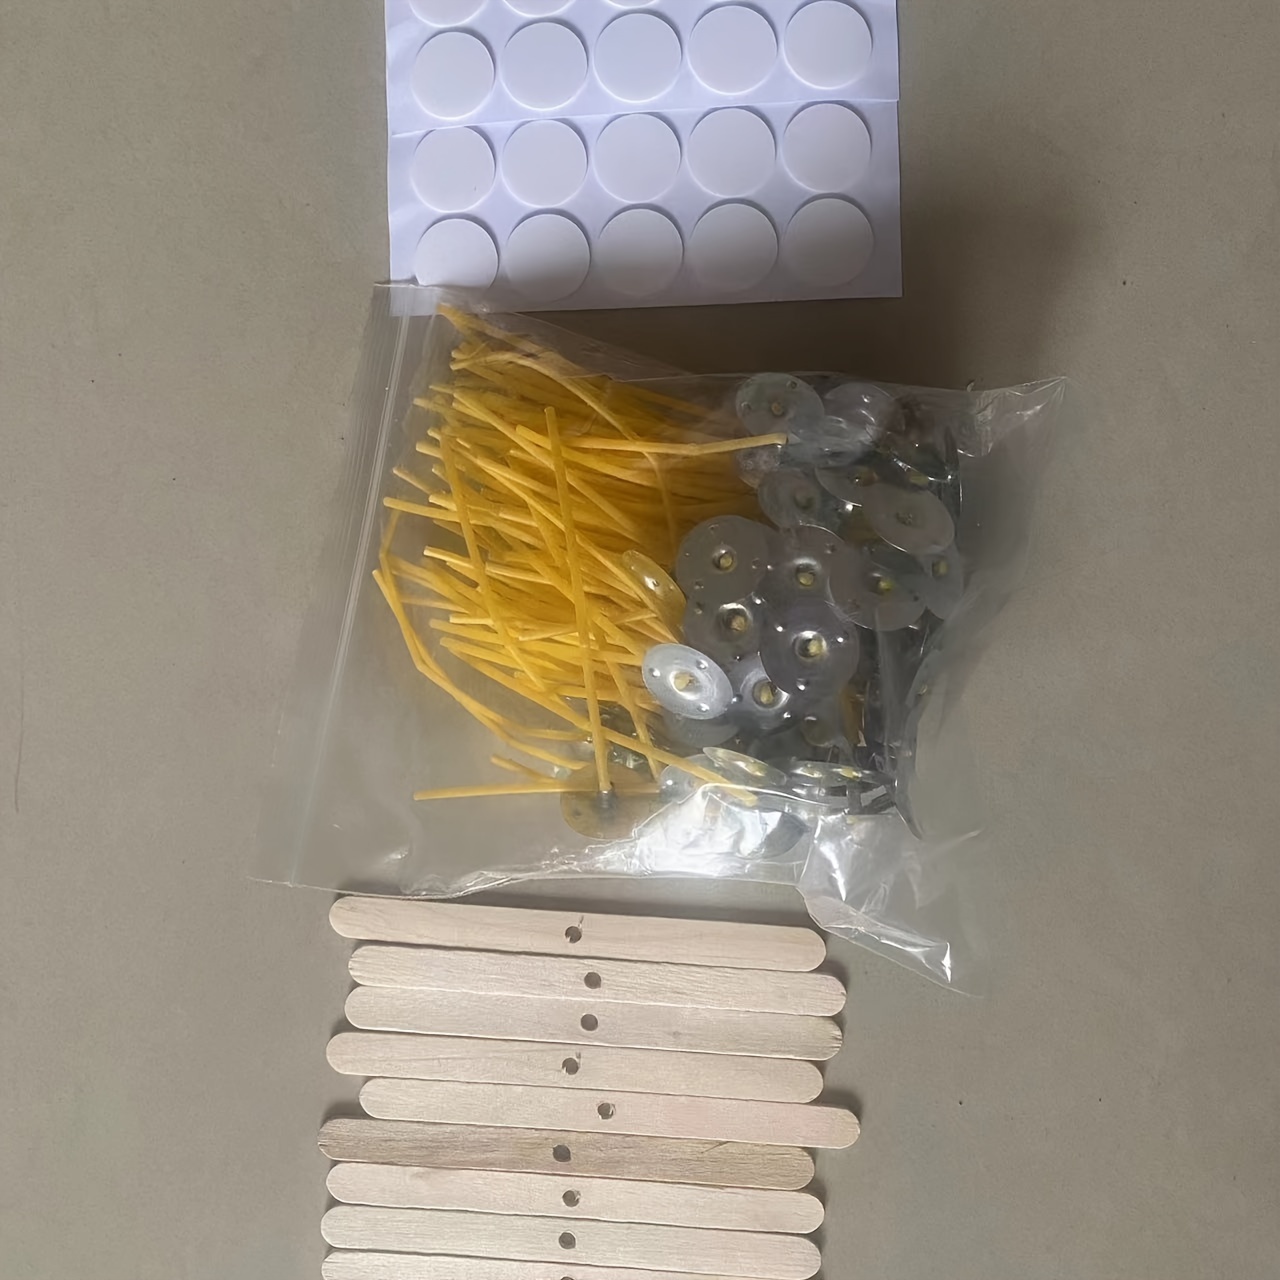 

Beeswax Candle Making Kit - 50pcs Thick Wicks, 3.5" X 2.5mm With 40 Stickers & 10 Wooden Centering Devices For Diy Candles